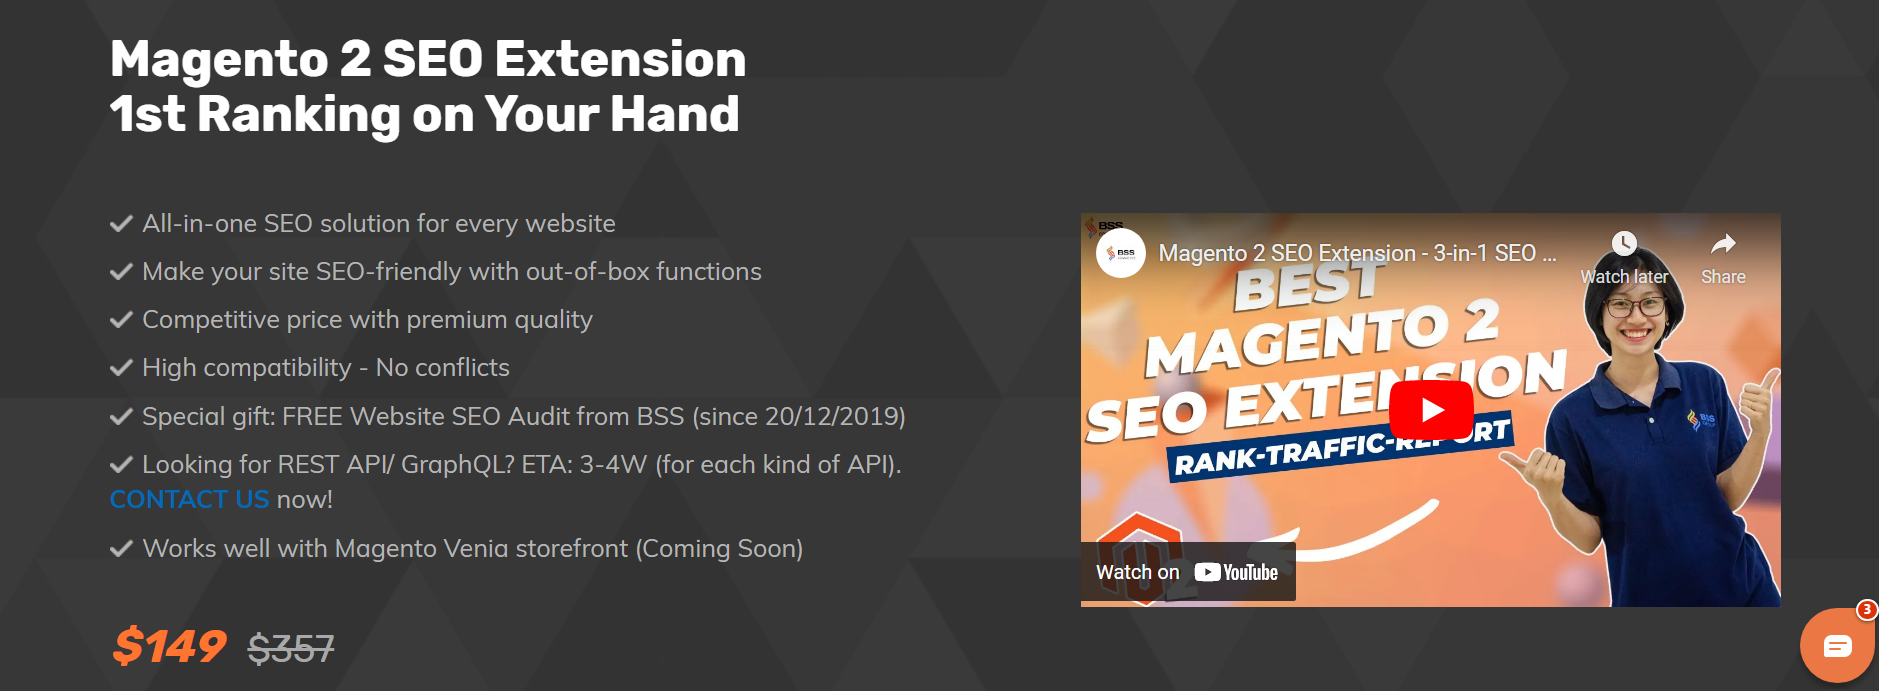 BSS Commerce Magento 2 SEO Extension is a one-stop solution for all your SEO needs. This feature-enriched SEO extension grabs the visitors' attention by showcasing product snippets in SERPs along with attributes such as price, rating, review, availability, etc. You can easily generate HTML/XML sitemaps containing products, categories, CMS pages, and additional links. Also, you may use the robot meta tags to instruct crawlers to index websites and HREFLANG to avoid duplicate content. Use this Magento 2 SEO extension to optimize your Magento store at a competitive price of $119 for community and enterprise versions 2.3.x - 2.4.x.